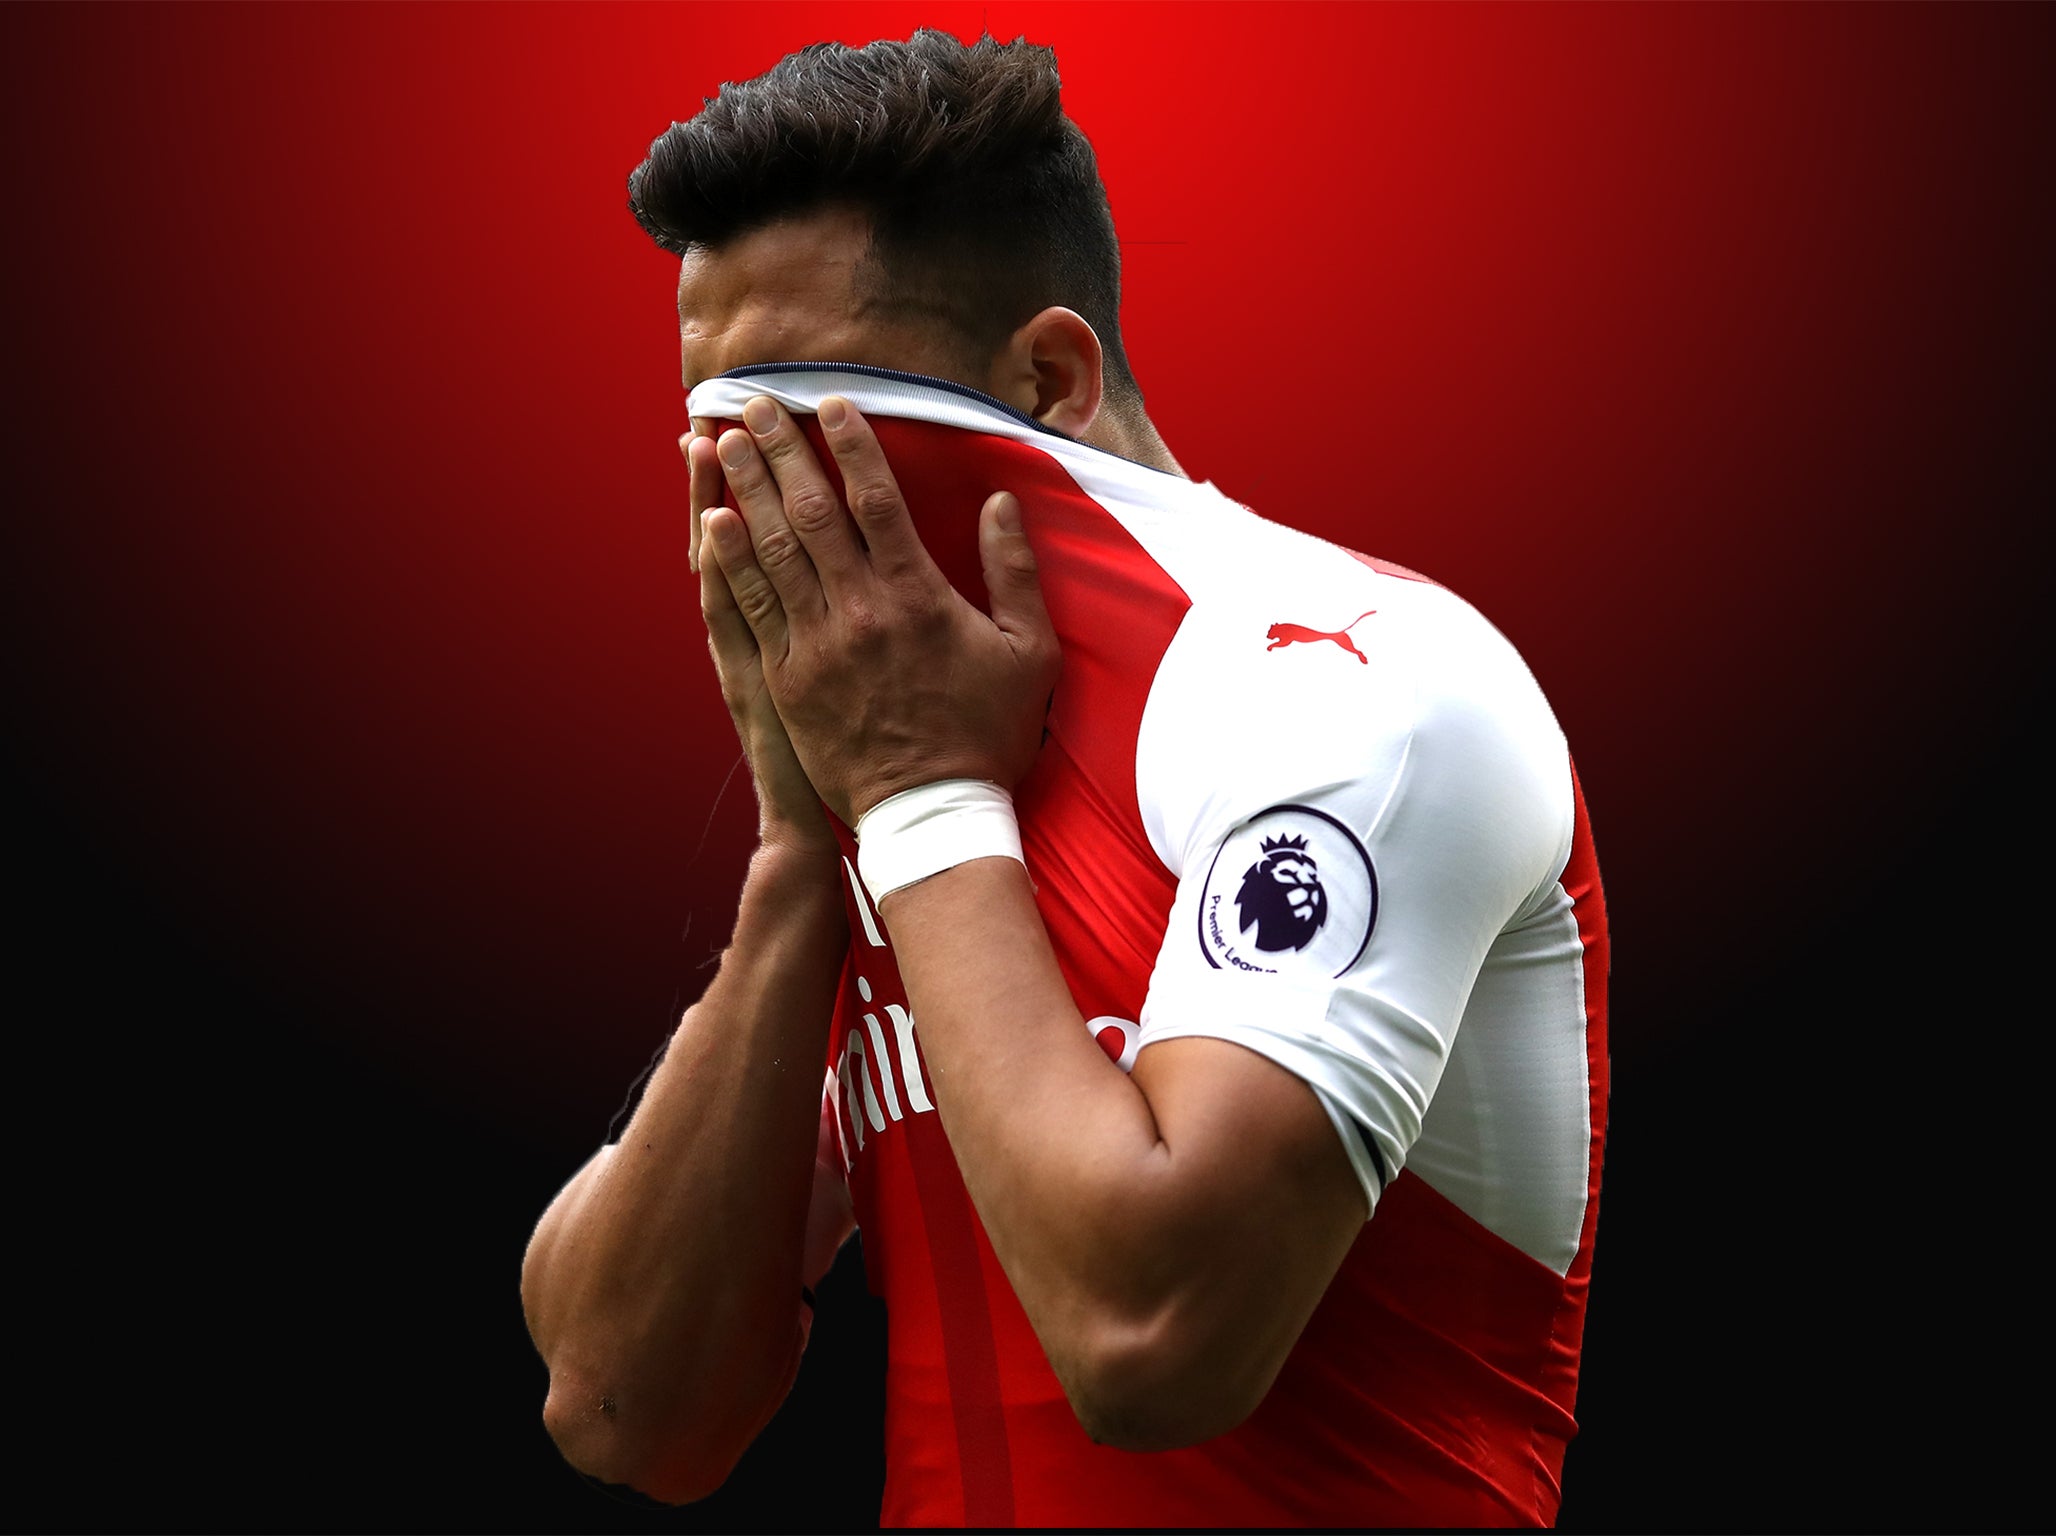 Sanchez has been badly treated by Arsenal